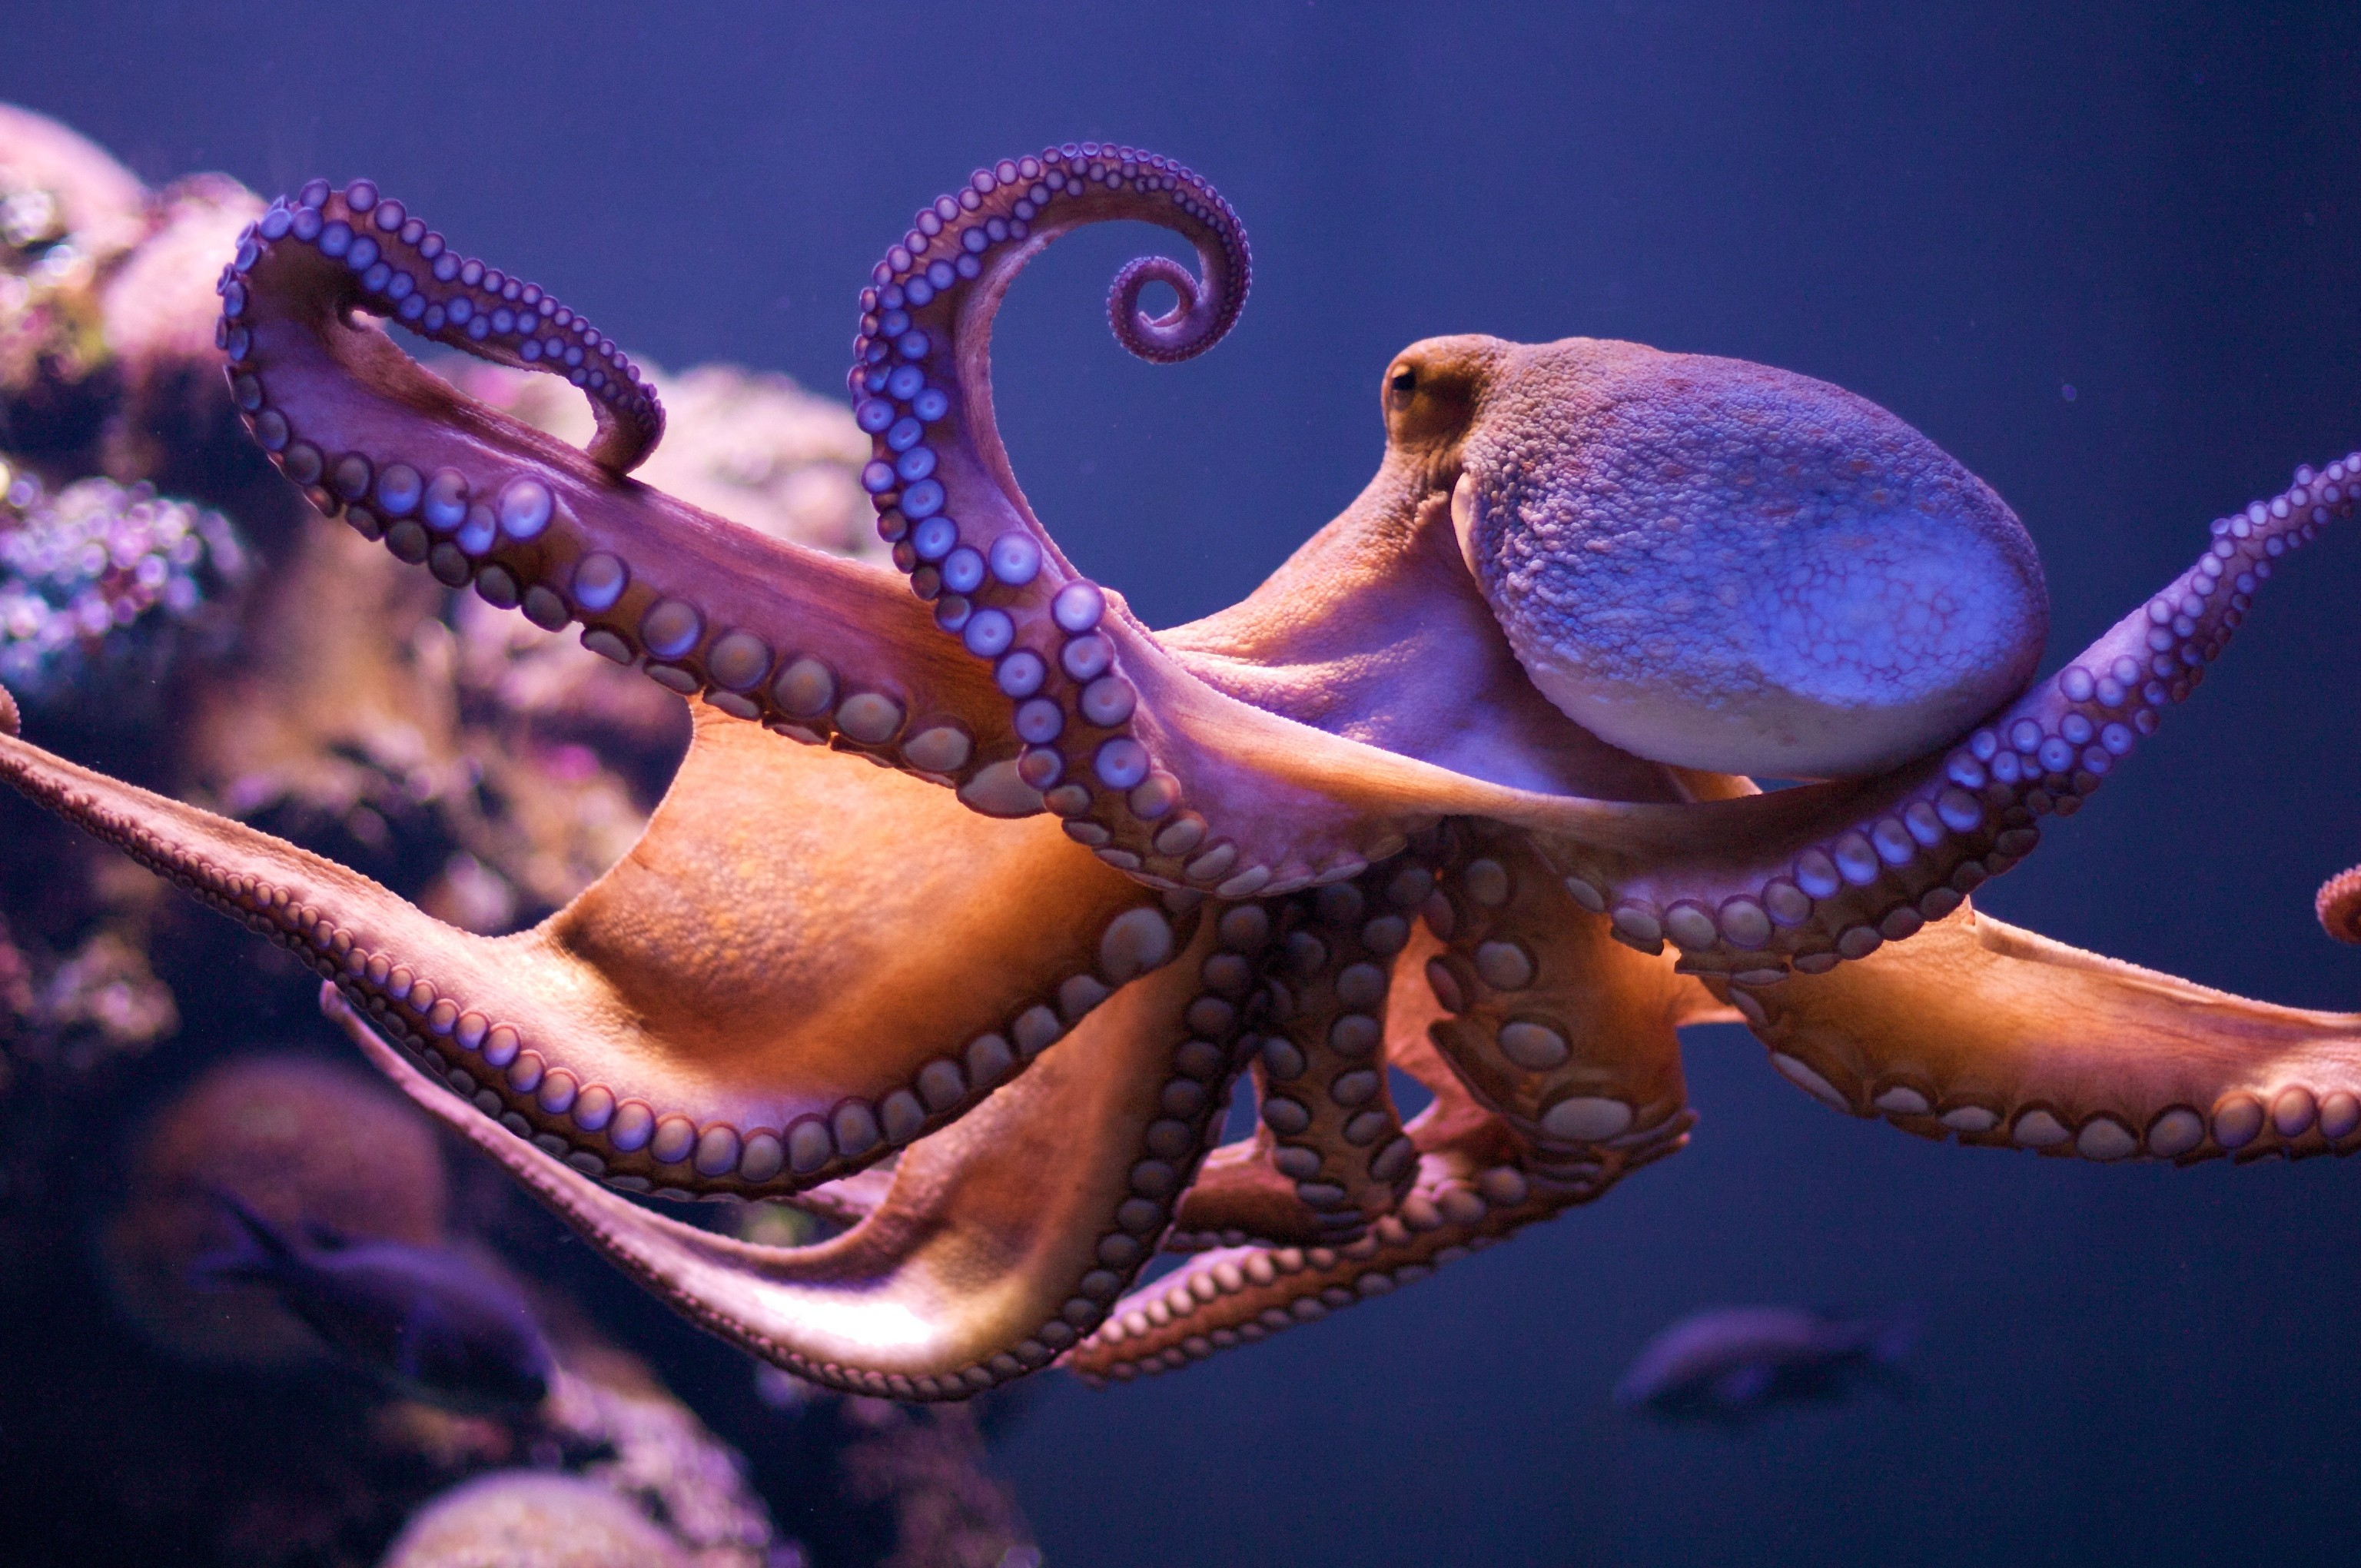 3072x2040 Octopus wallpaper &Acirc;&middot;&acirc;&#145;&nbsp; Download free stunning backgrounds for desktop and mobile devices in any resolution: desktop, Android, iPhone, iPad 1920x1080, 1600x900, 1280x900, 1440x900 etc.